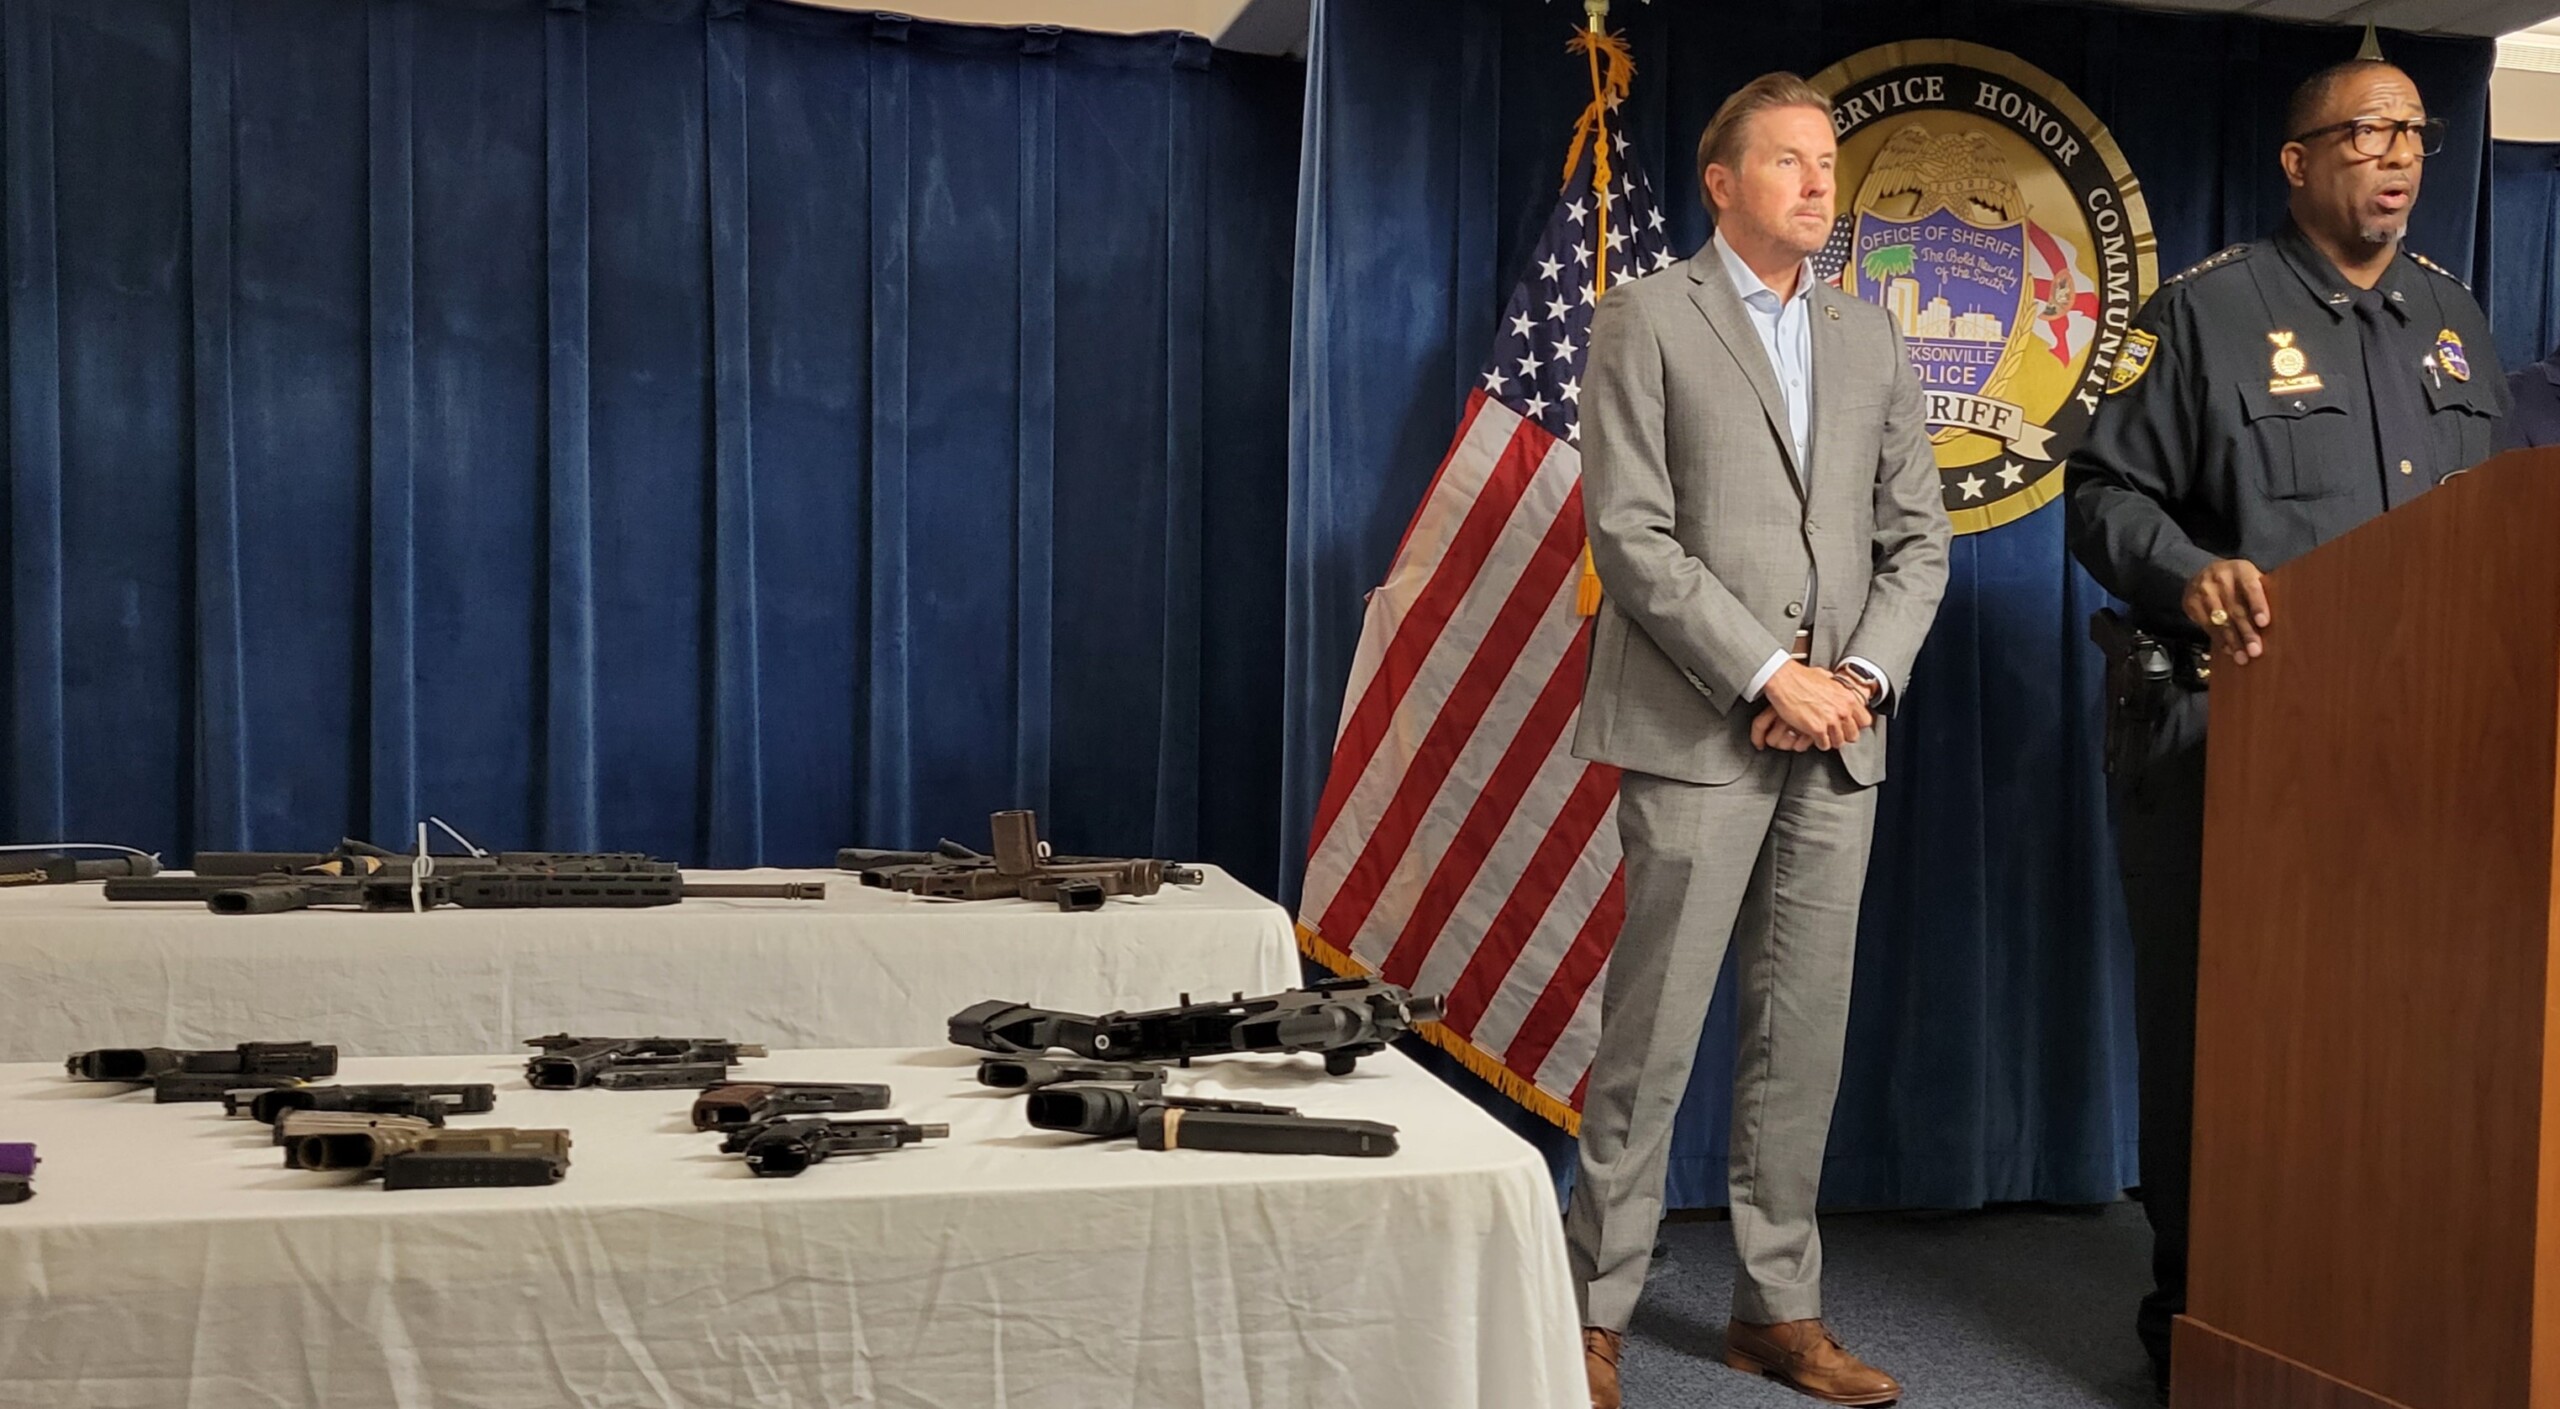 Sheriff T.K. Waters speaks at a new conference Tuesday, Aug. 8, 2023, as confiscated guns are shown nearby.